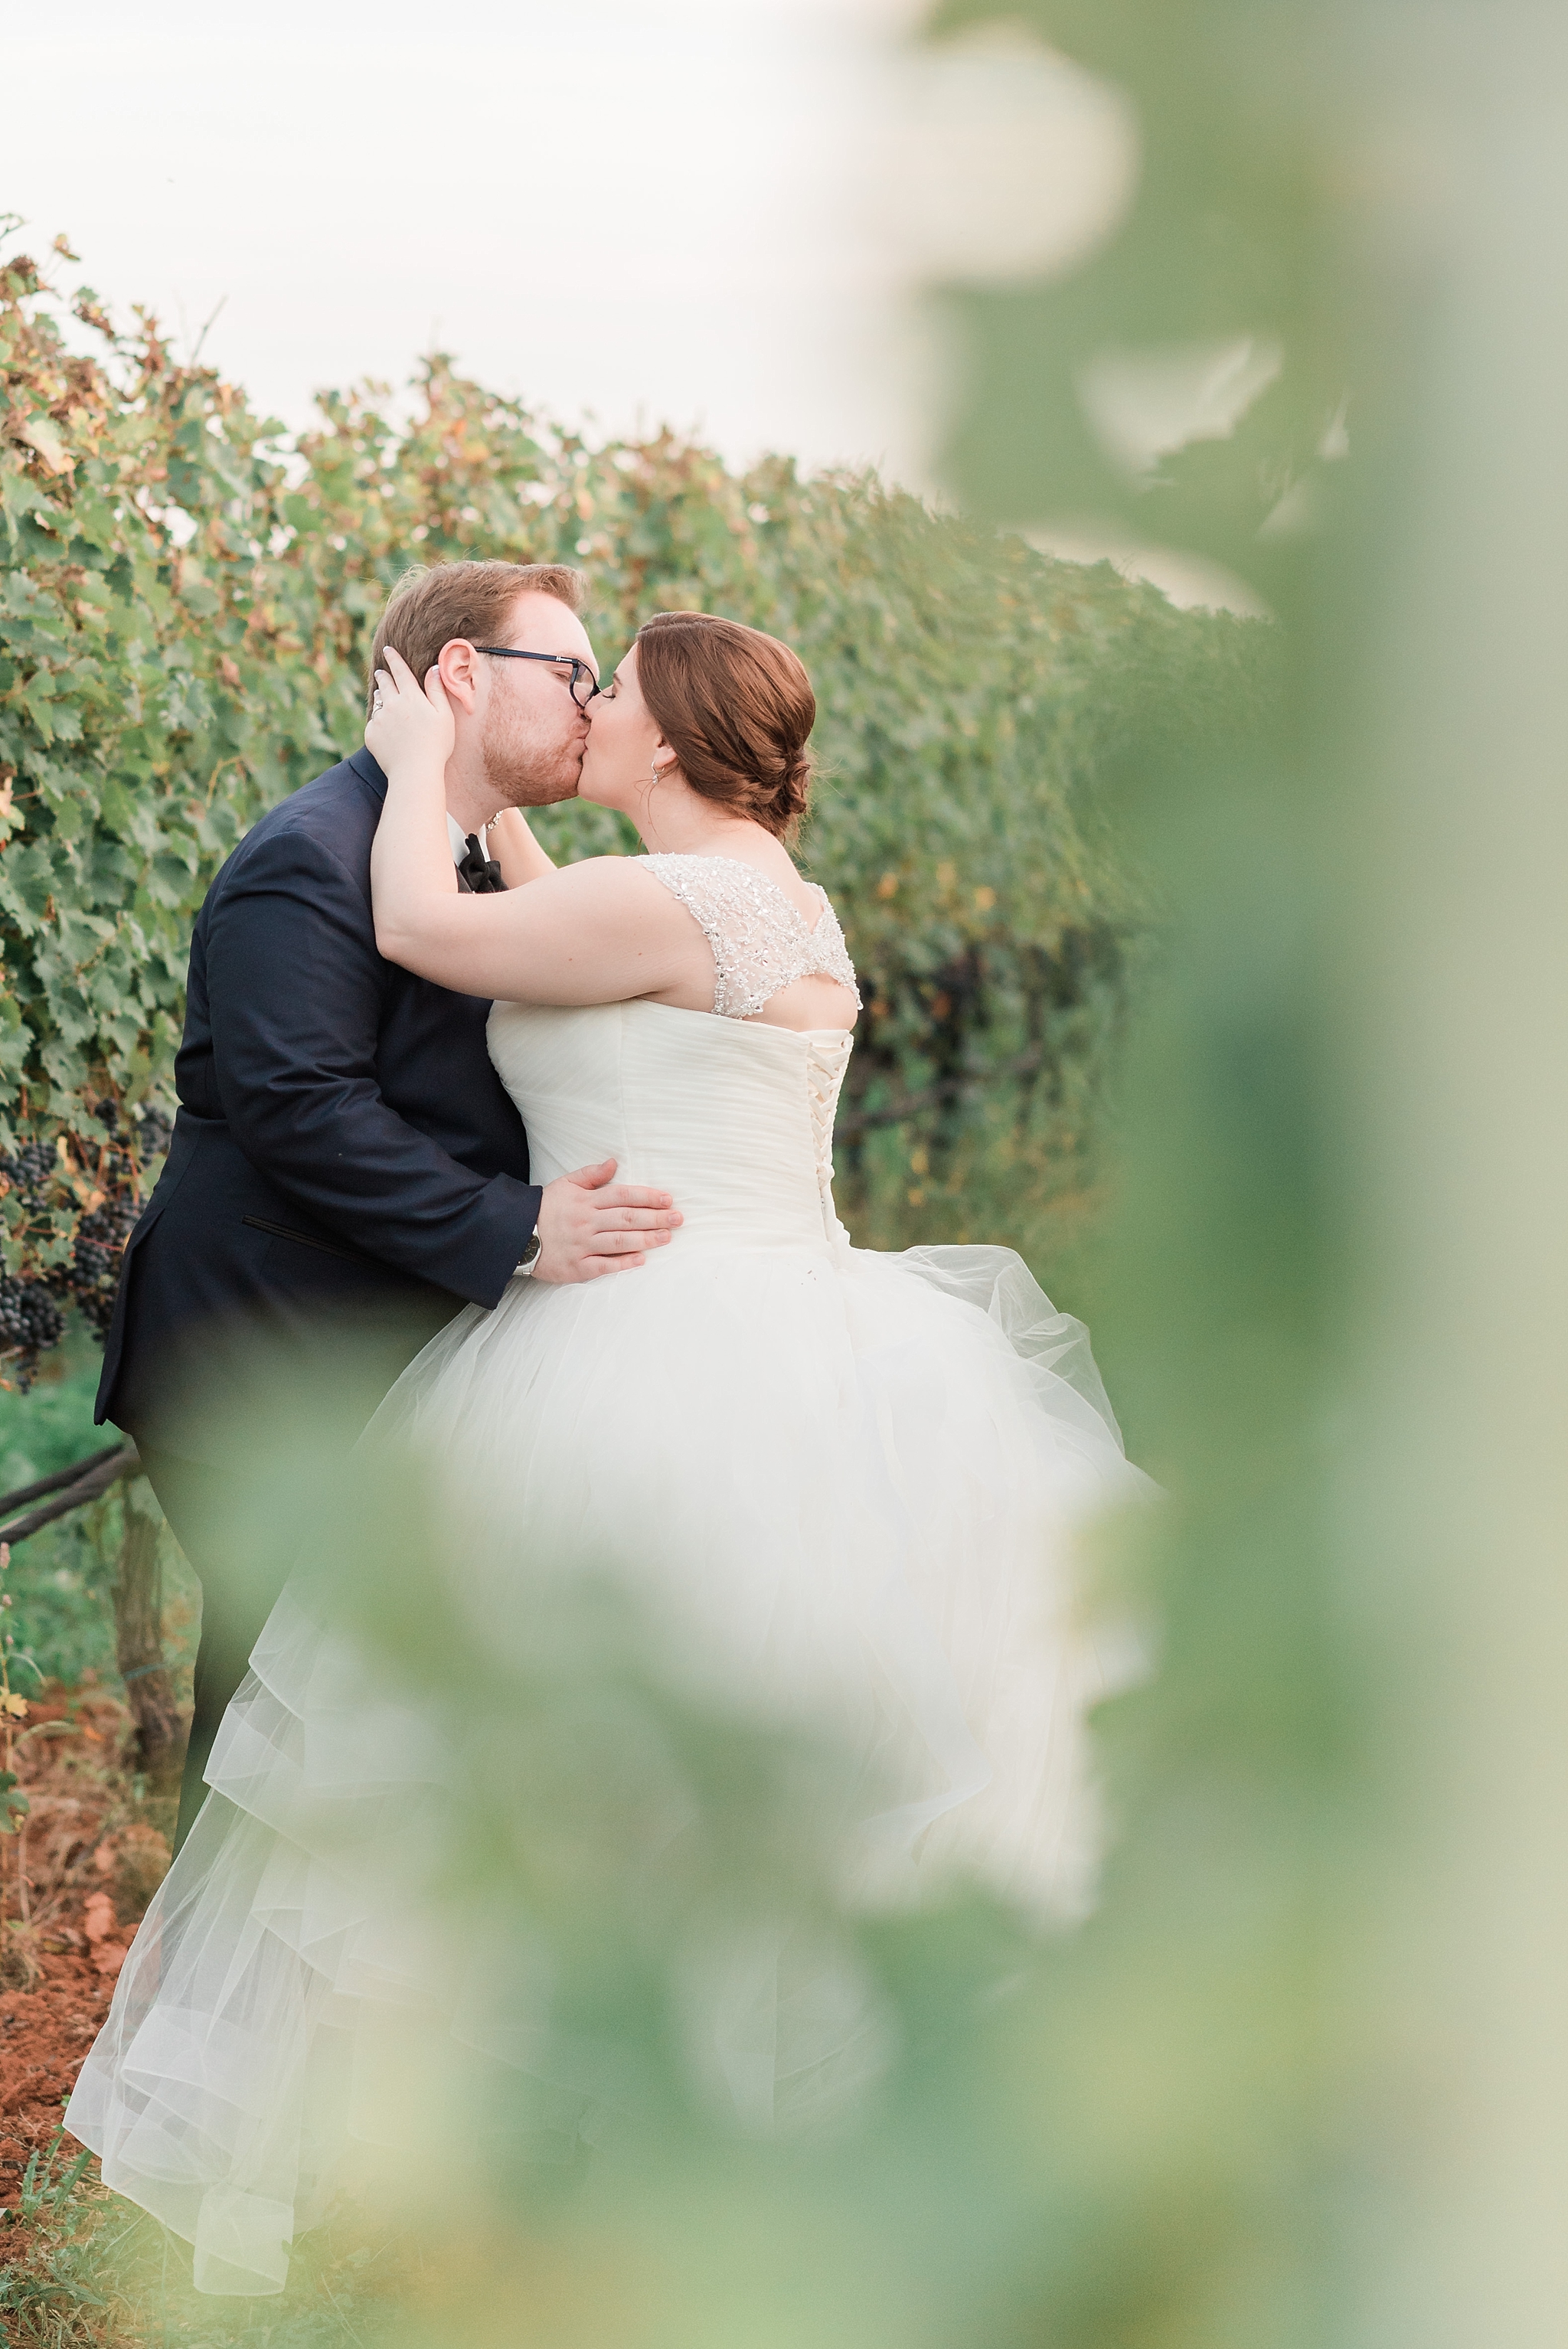 A classic Kate Spade themed wedding at Early Mountain Vineyards in Madison, VA. 